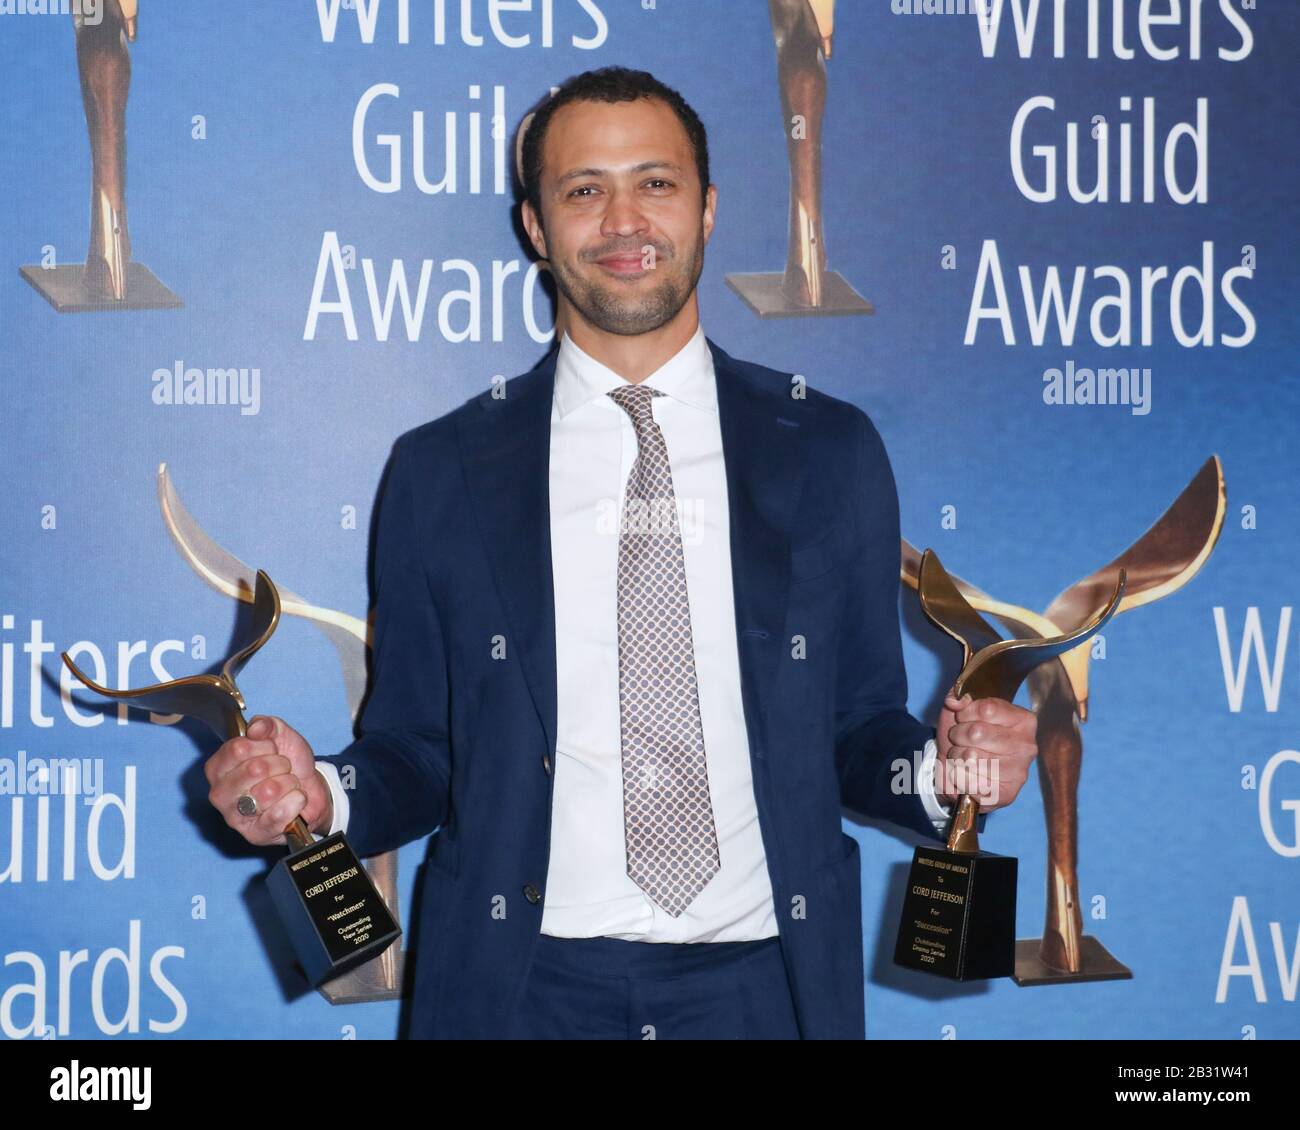 Writers Guild Awards 2020 - West Coast Ceremony Press Room at the Beverly Hilton Hotel in Beverly Hills, California on February 1, 2020 Featuring: Cord Jefferson Where: Beverly Hills, California, United States When: 01 Feb 2020 Credit: Sheri Determan/WENN.com Stock Photo